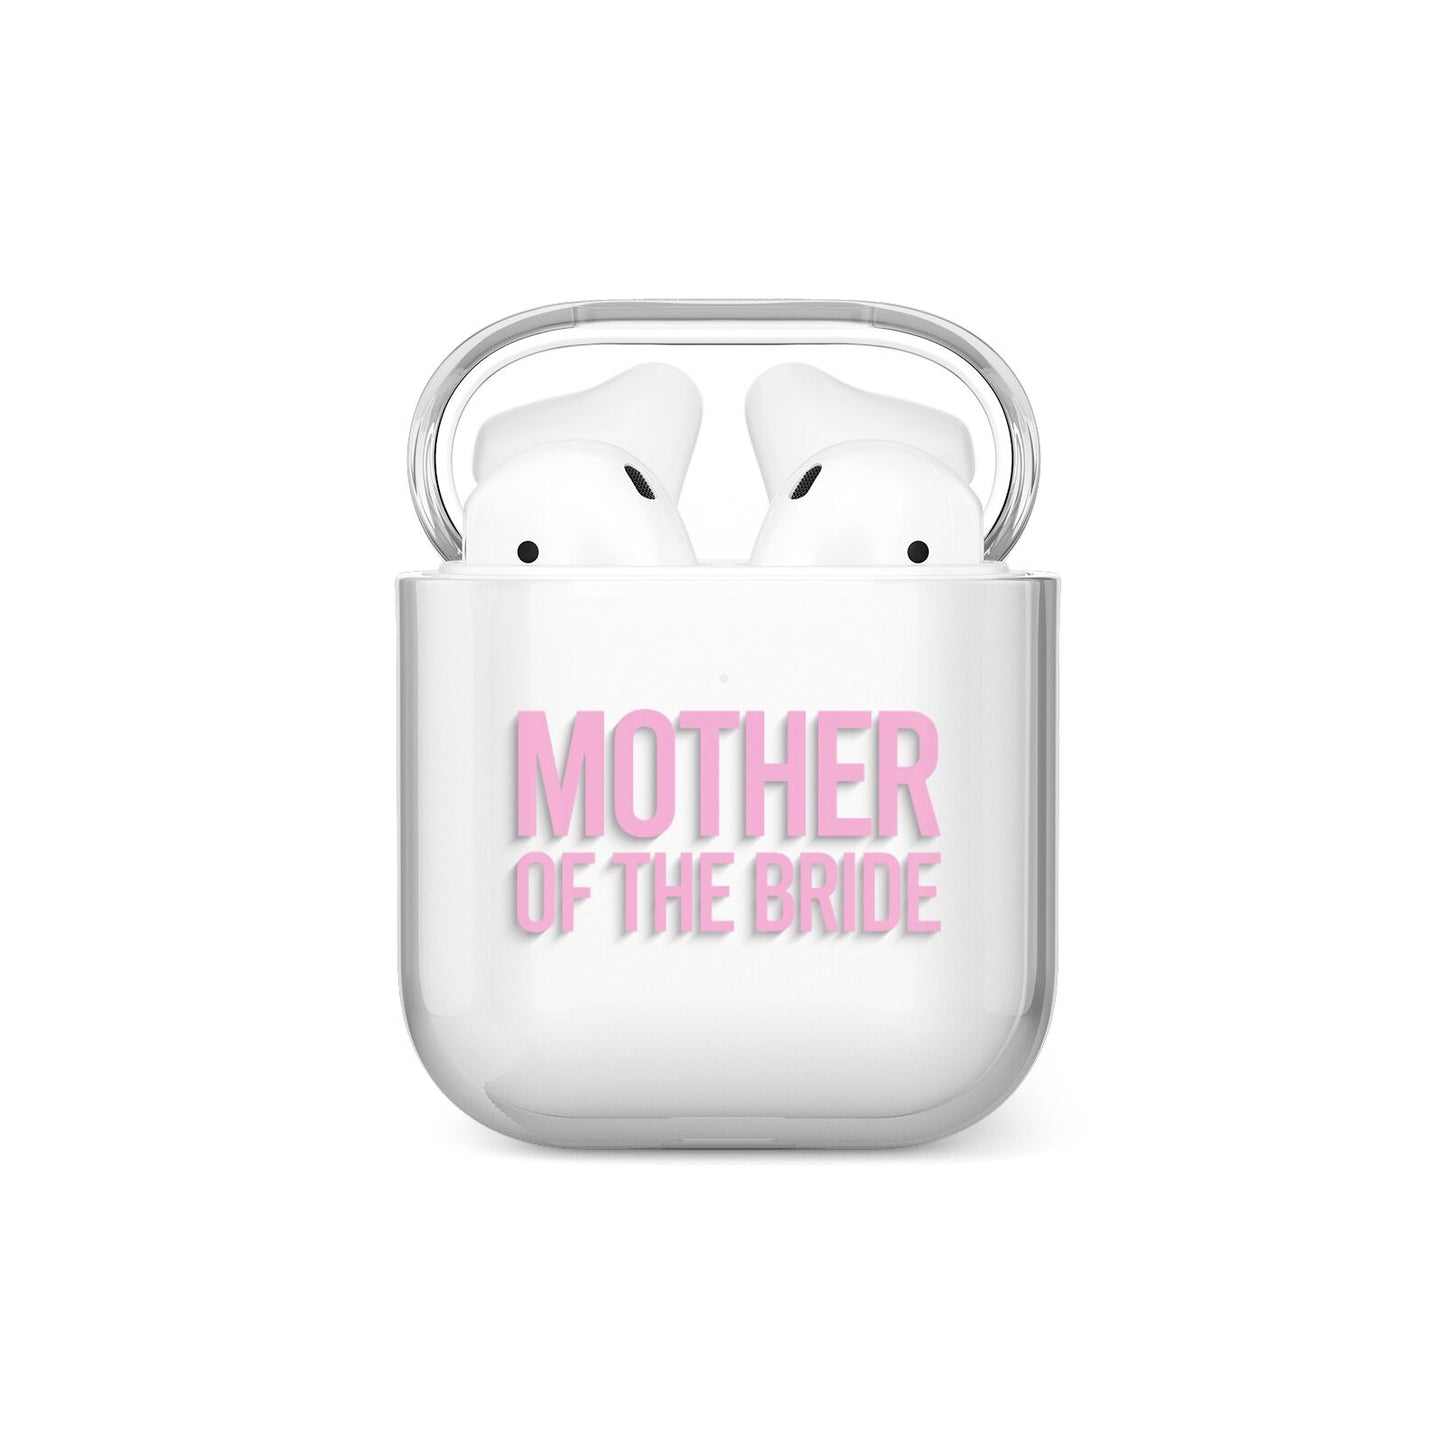 Mother of the Bride AirPods Case